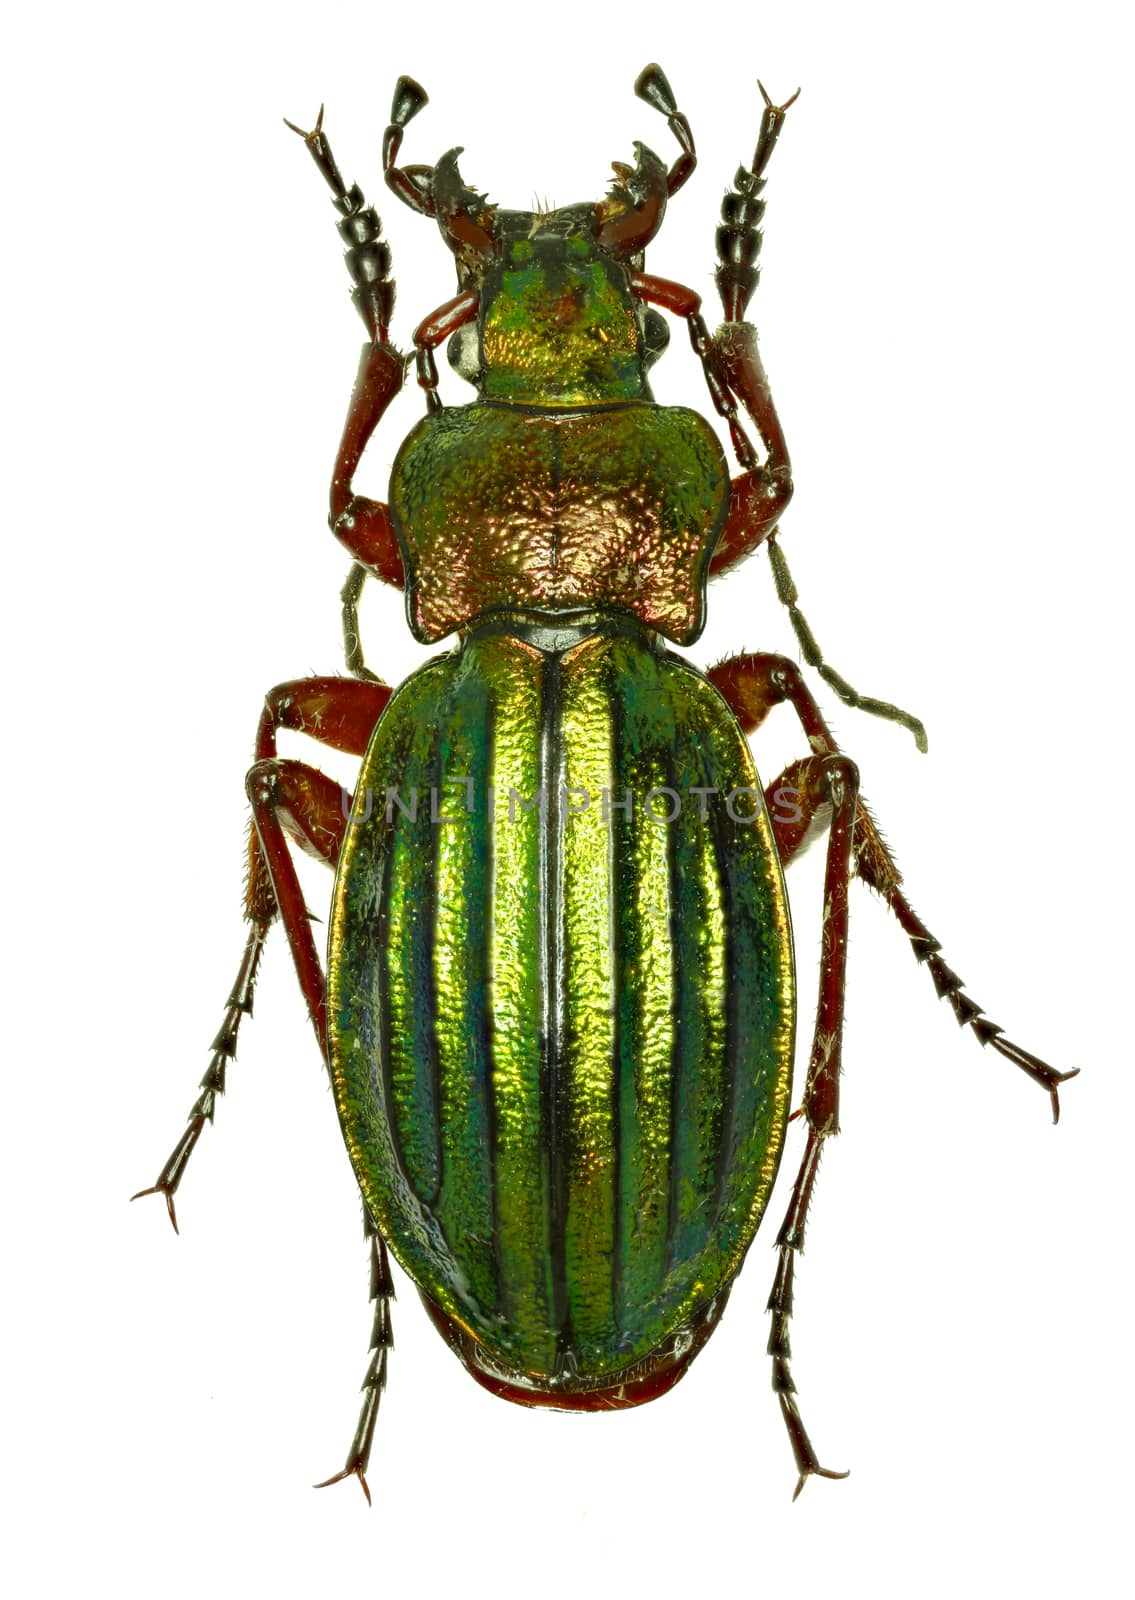 Golden Ground Beetle on white Background  -  Carabus auronitens (Fabricius, 1792)